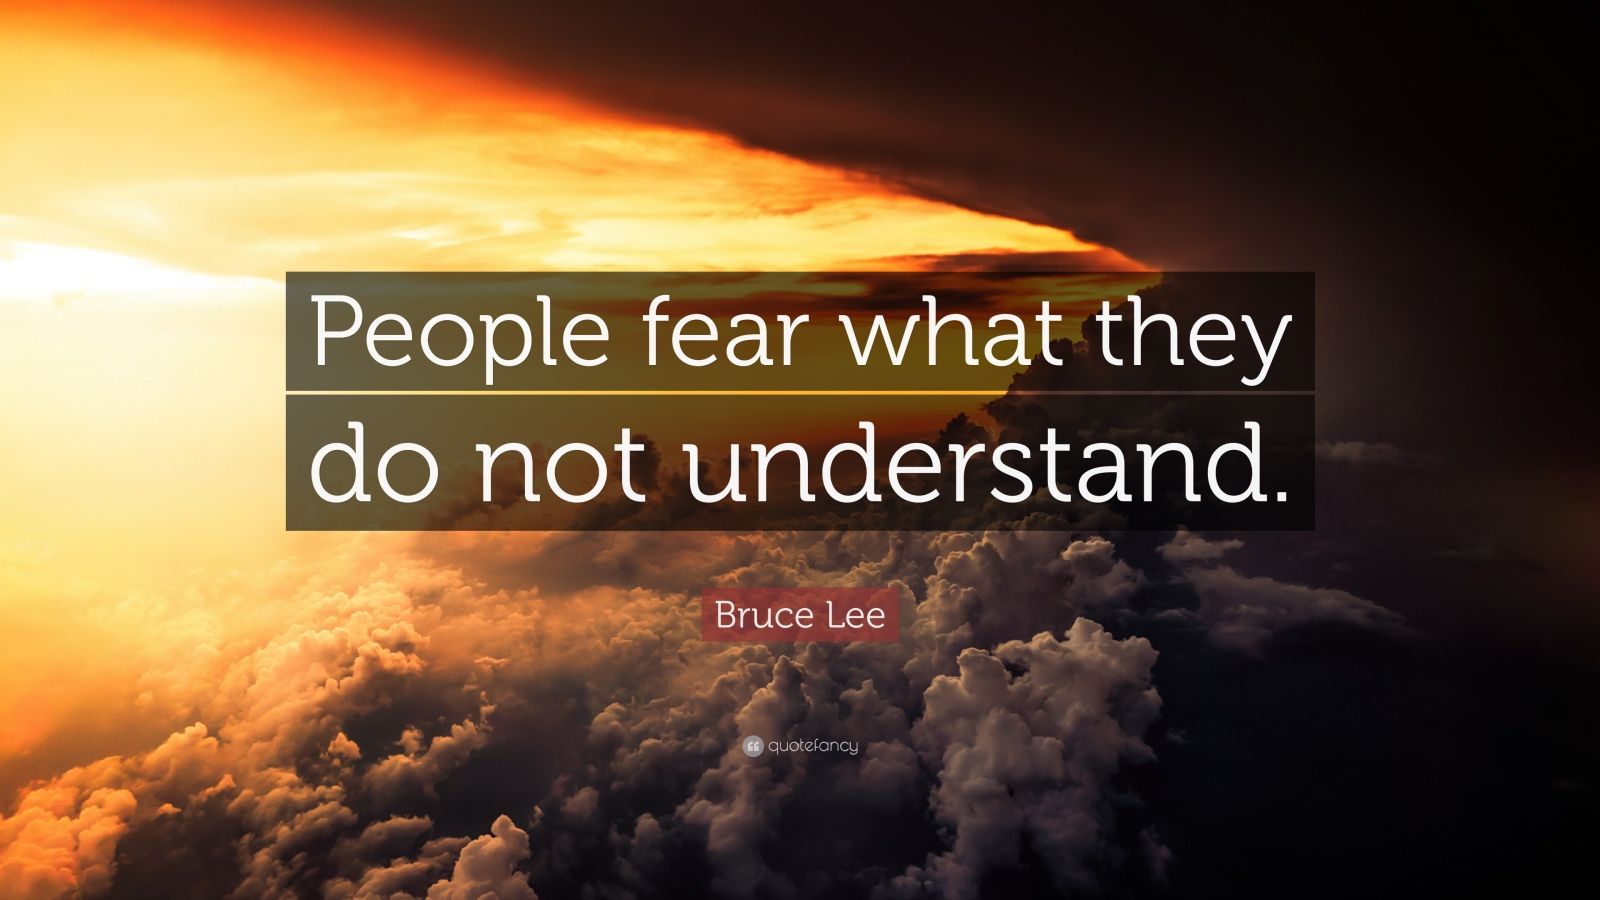 Bruce Lee Quote: “People fear what they do not understand.” (12